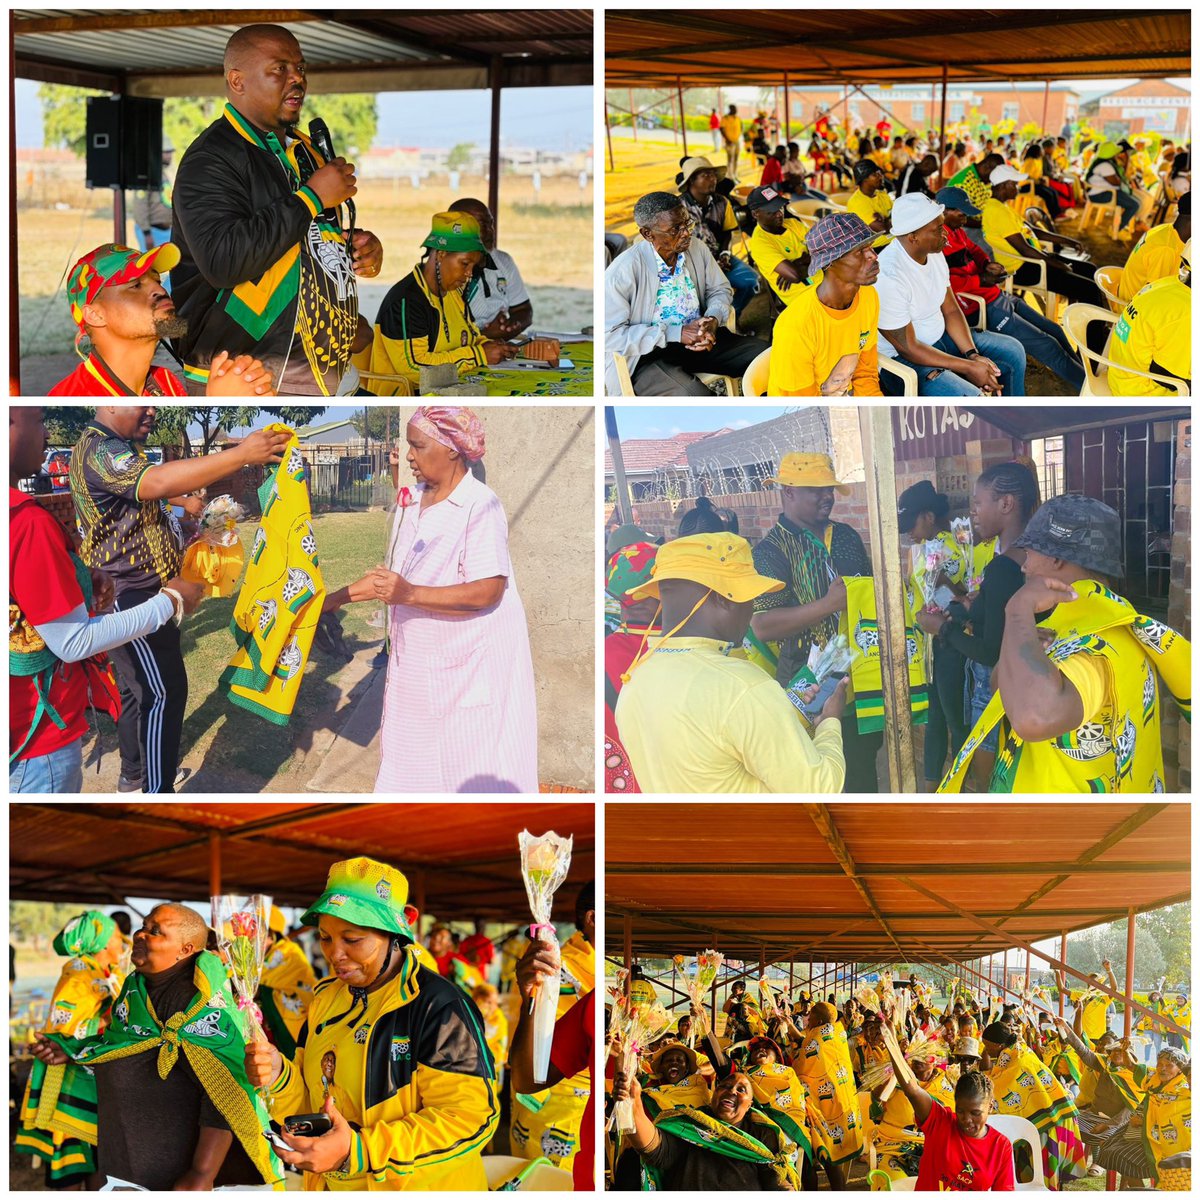 ANC KZN Deputy Provincial Secretary, Comrade Sipho Hlomuka, along with regional leaders and volunteers from the Newcastle Sub-region, engaged in a door-to-door campaign in the Khaselihle VD area, honoring and celebrating mothers on Mother's Day. Comrade Hlomuka emphasized the…